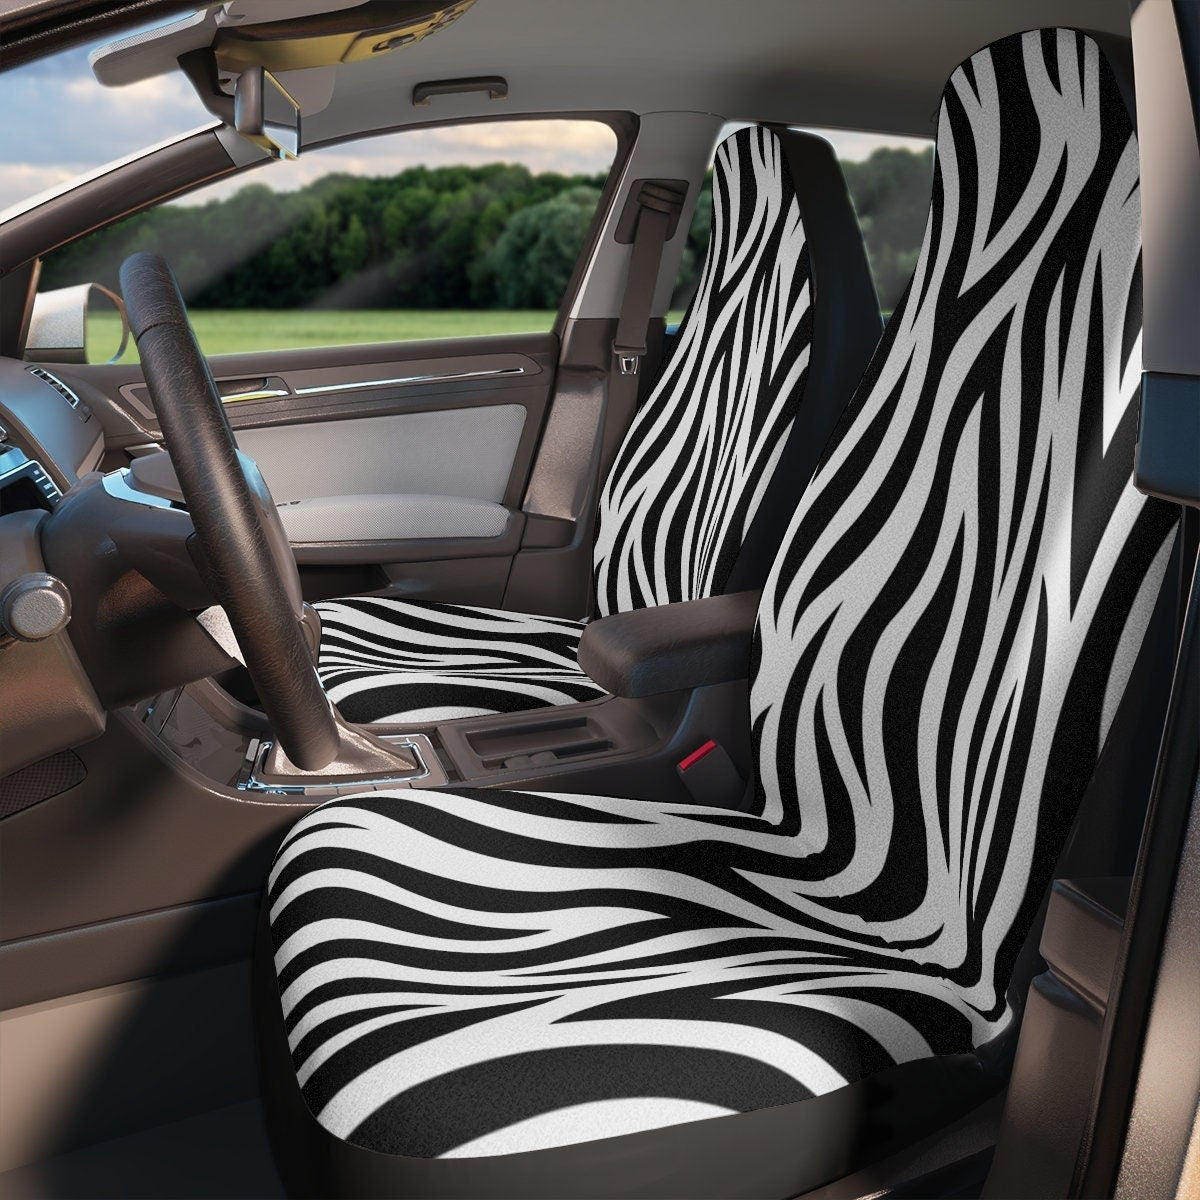 Seat Covers for Cars, Boho 70s Car Seat Cover, Cute Car Accessories for Women, Hippie Car Decor,  Zebra Groovy Universal Vehicle Chair Cover HMDesignStudioUS